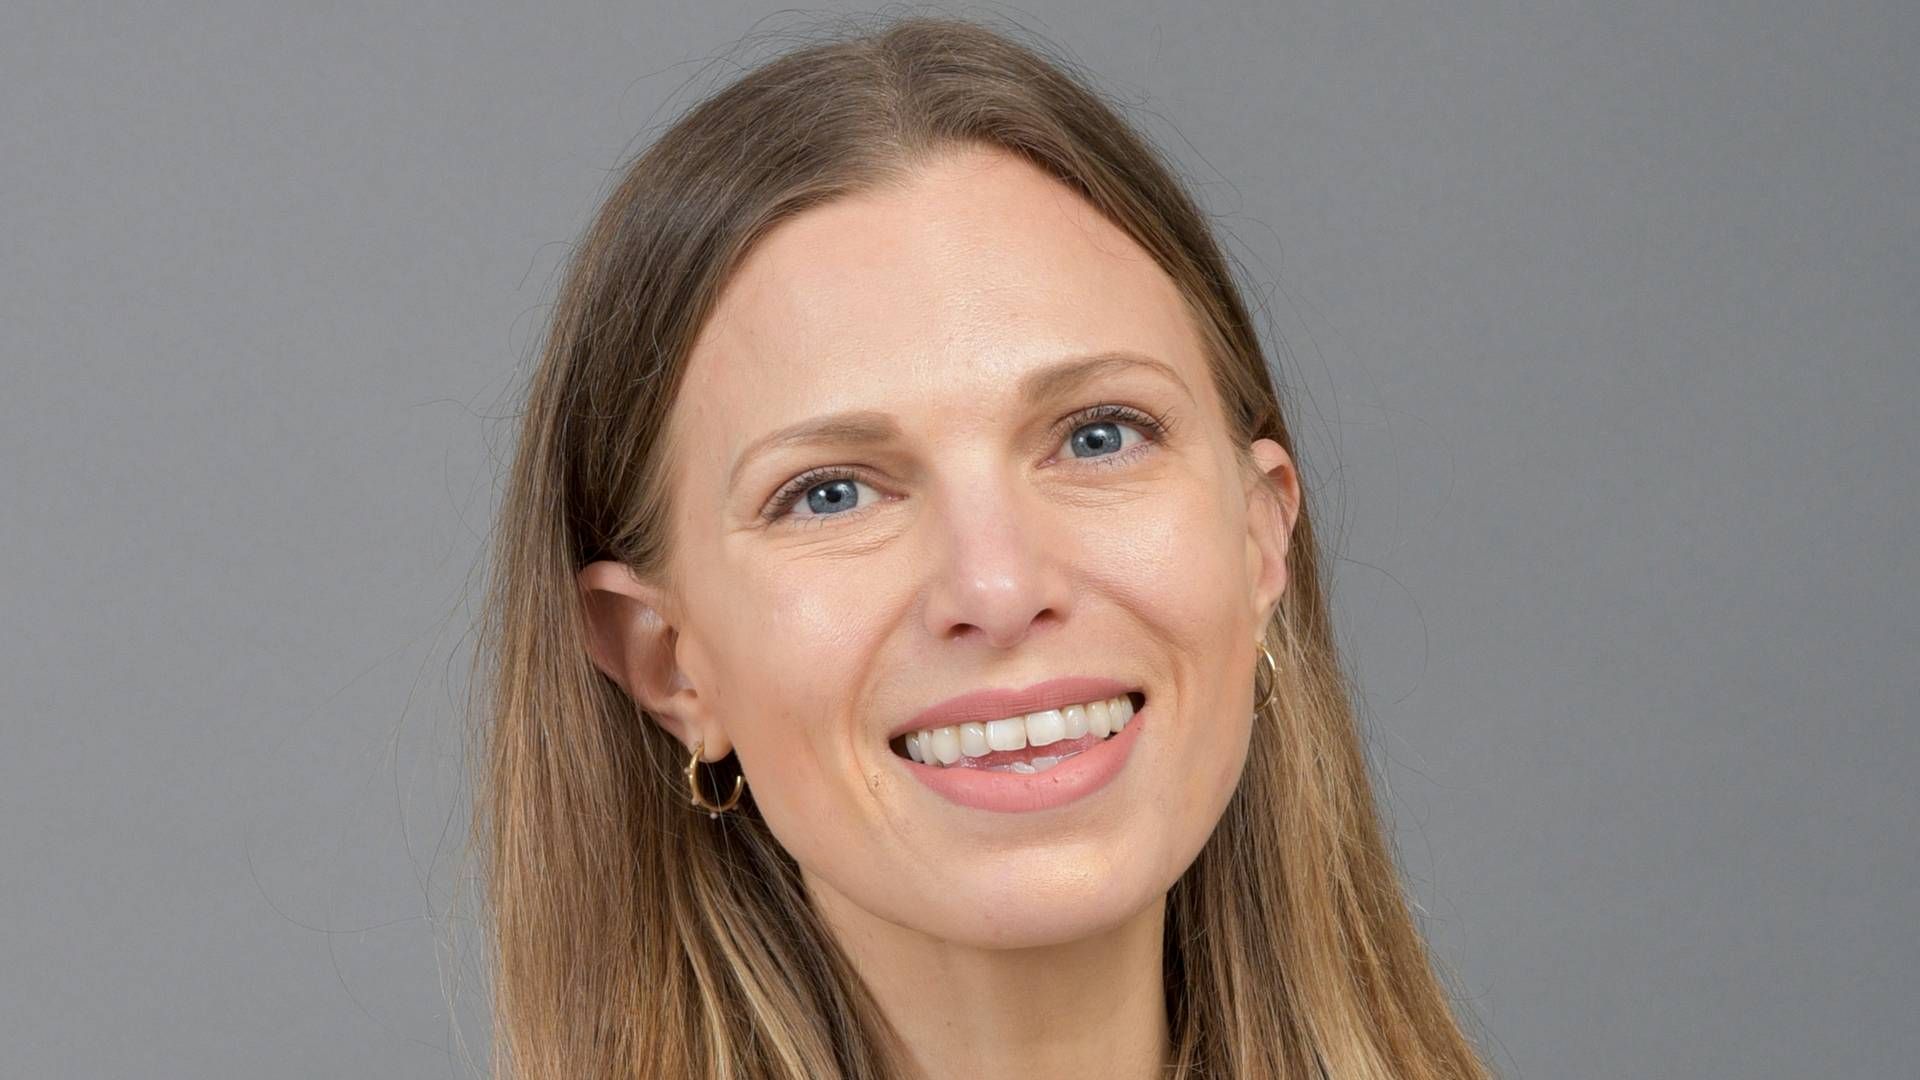 Assi Toivakka Kelly holds a Bachelor of Engineering from Aalto University (Finland) and a Master of Commerce in Finance from the University of Queensland (Australia). She is also qualified with the MRICS certification in real estate finance and investment. | Photo: PR / Leadcrest Cap